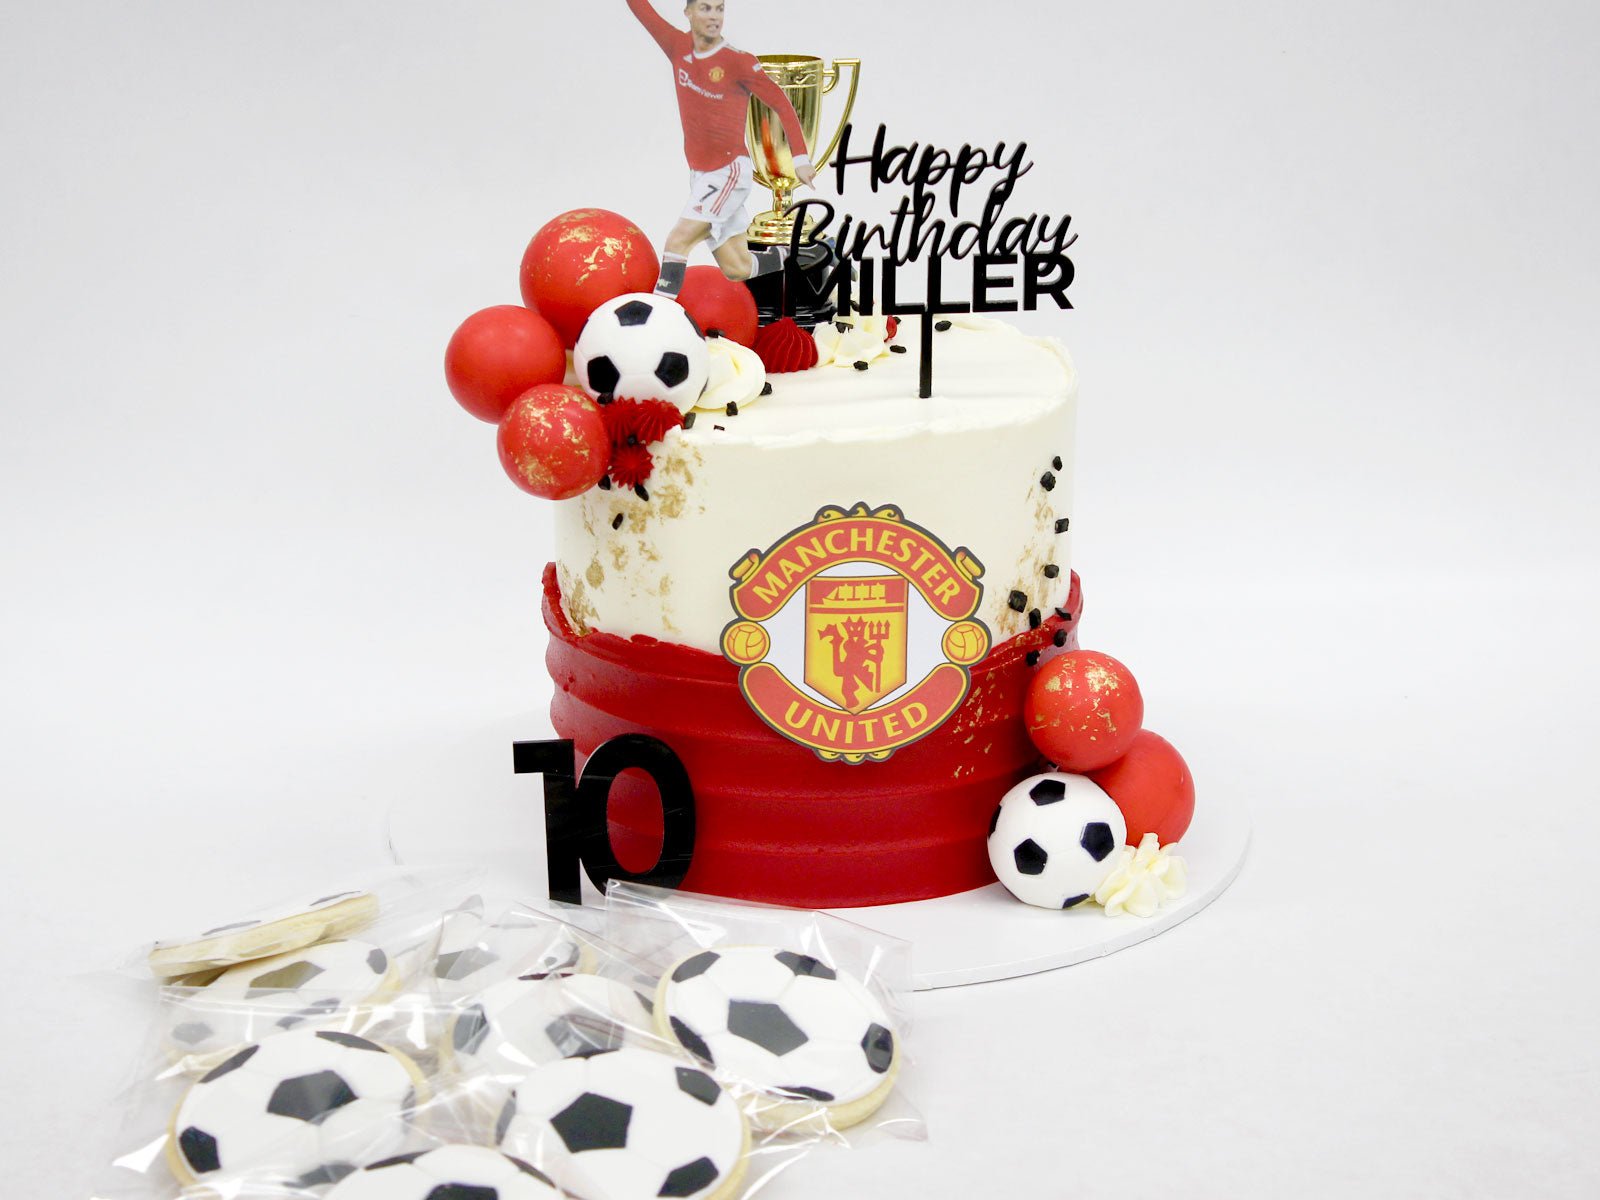 Manchester United cake - Decorated Cake by Faten_salah - CakesDecor